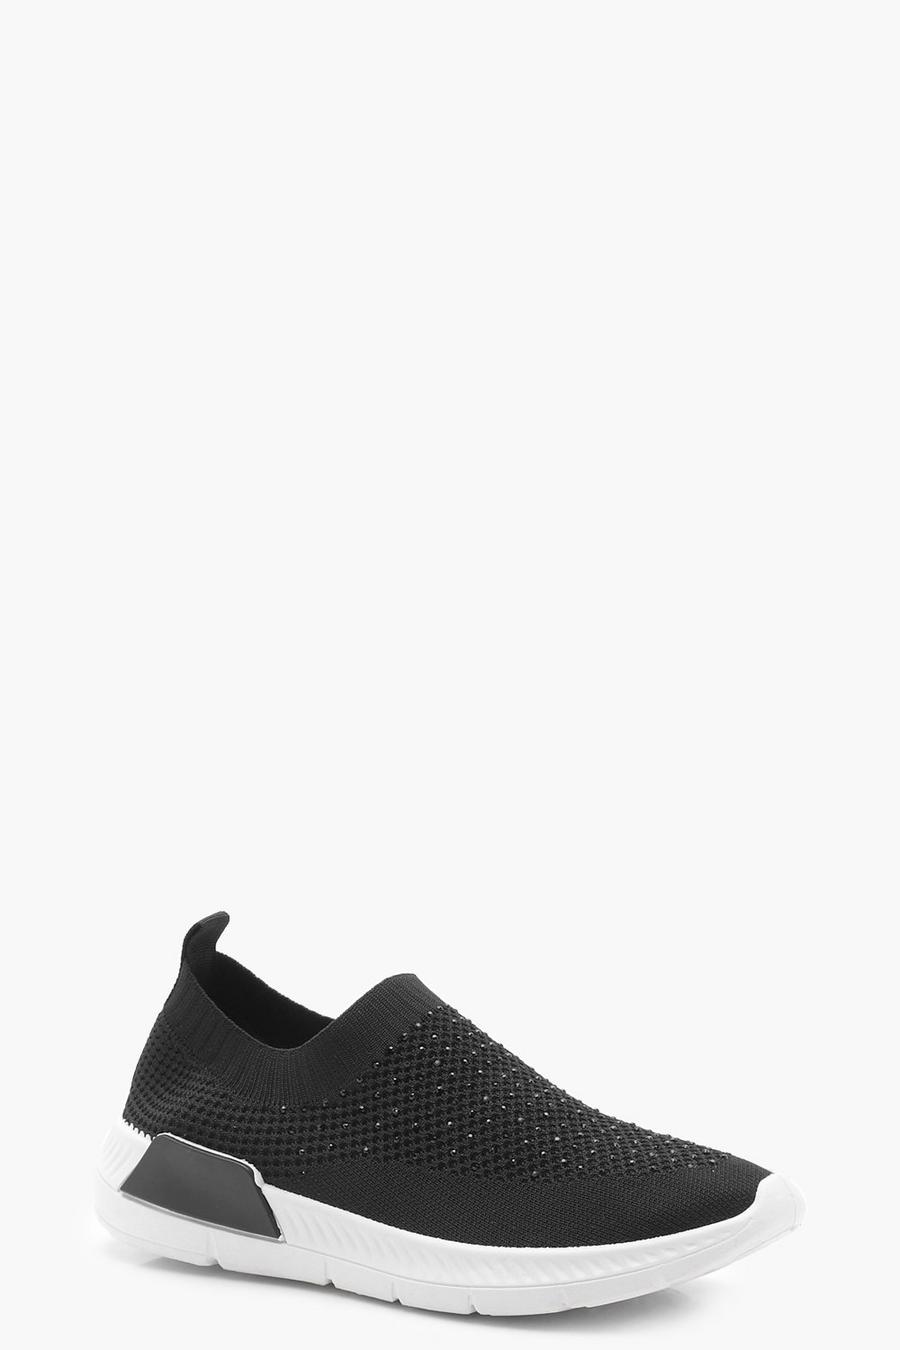 Diamante Knit Slip On Sneakers image number 1